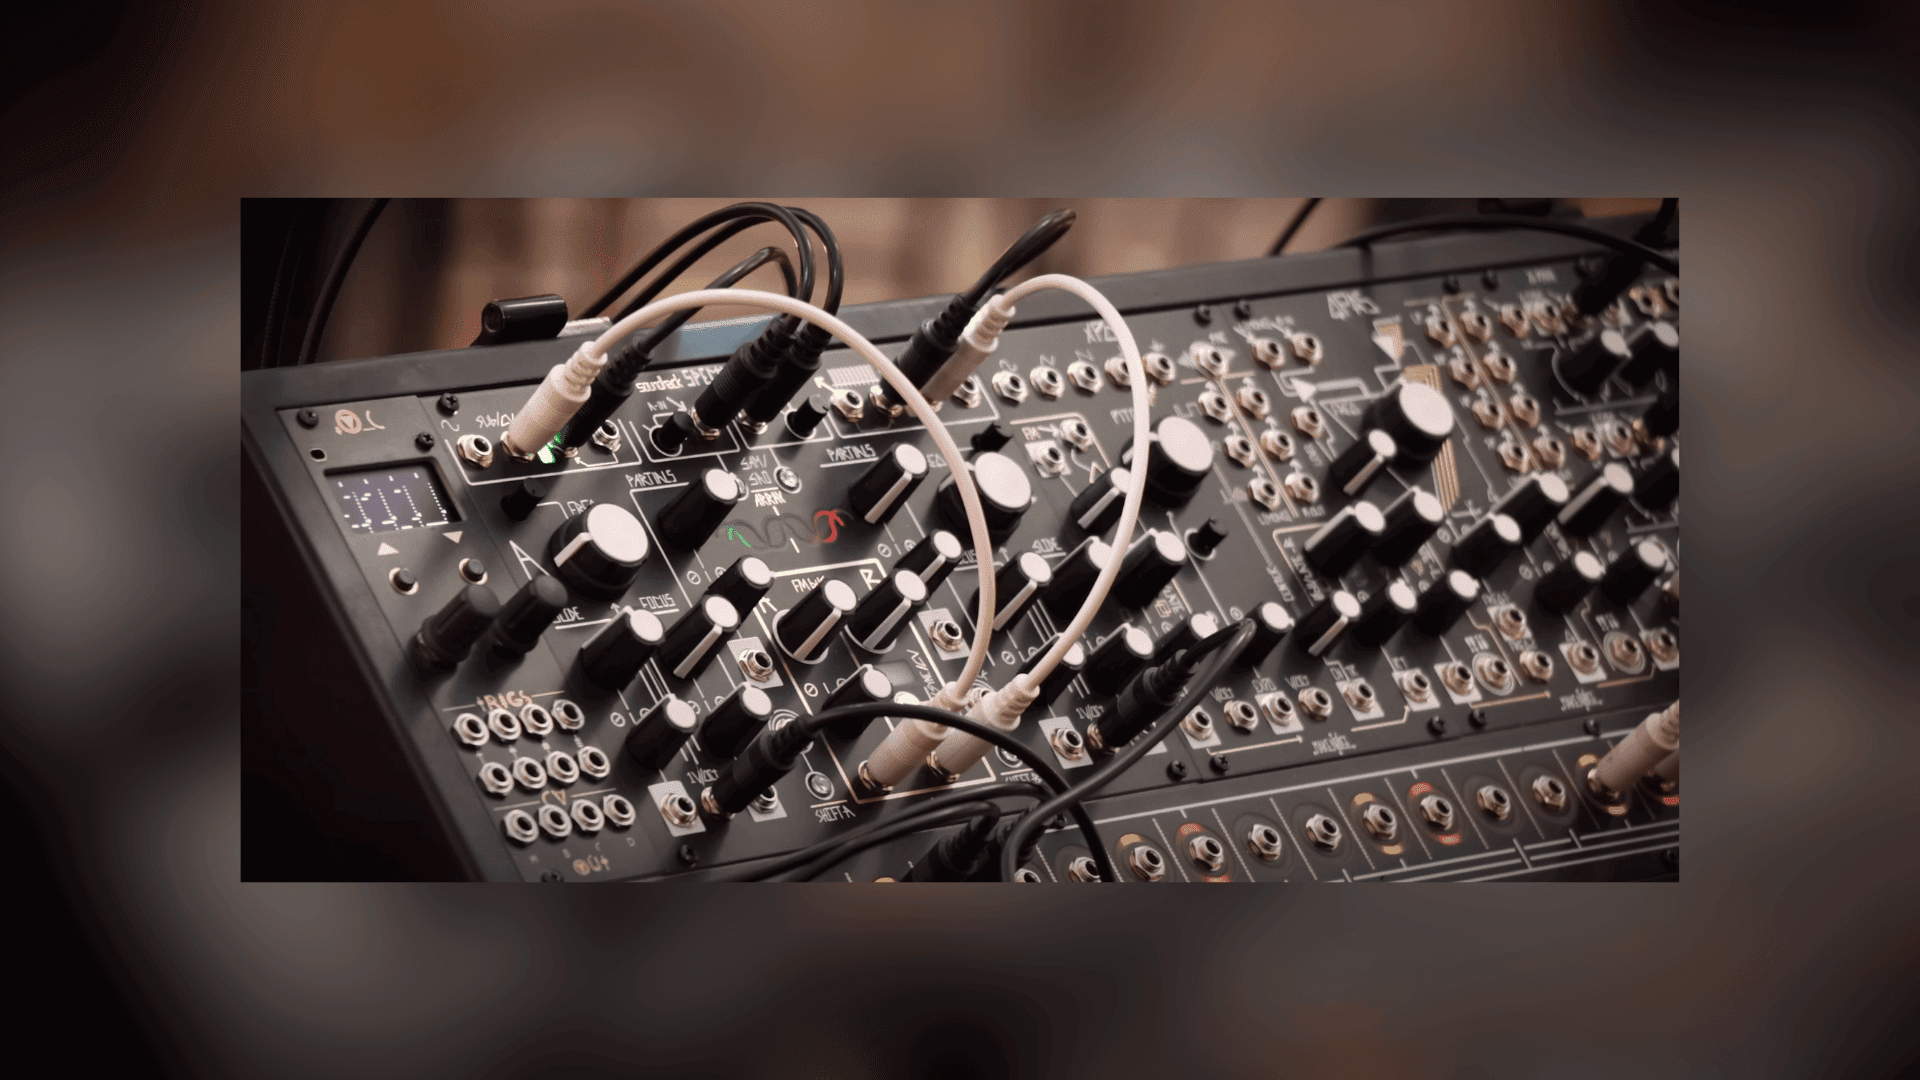 Make Noise reveales a new Dual Spectral Oscillator at Superbooth 2023